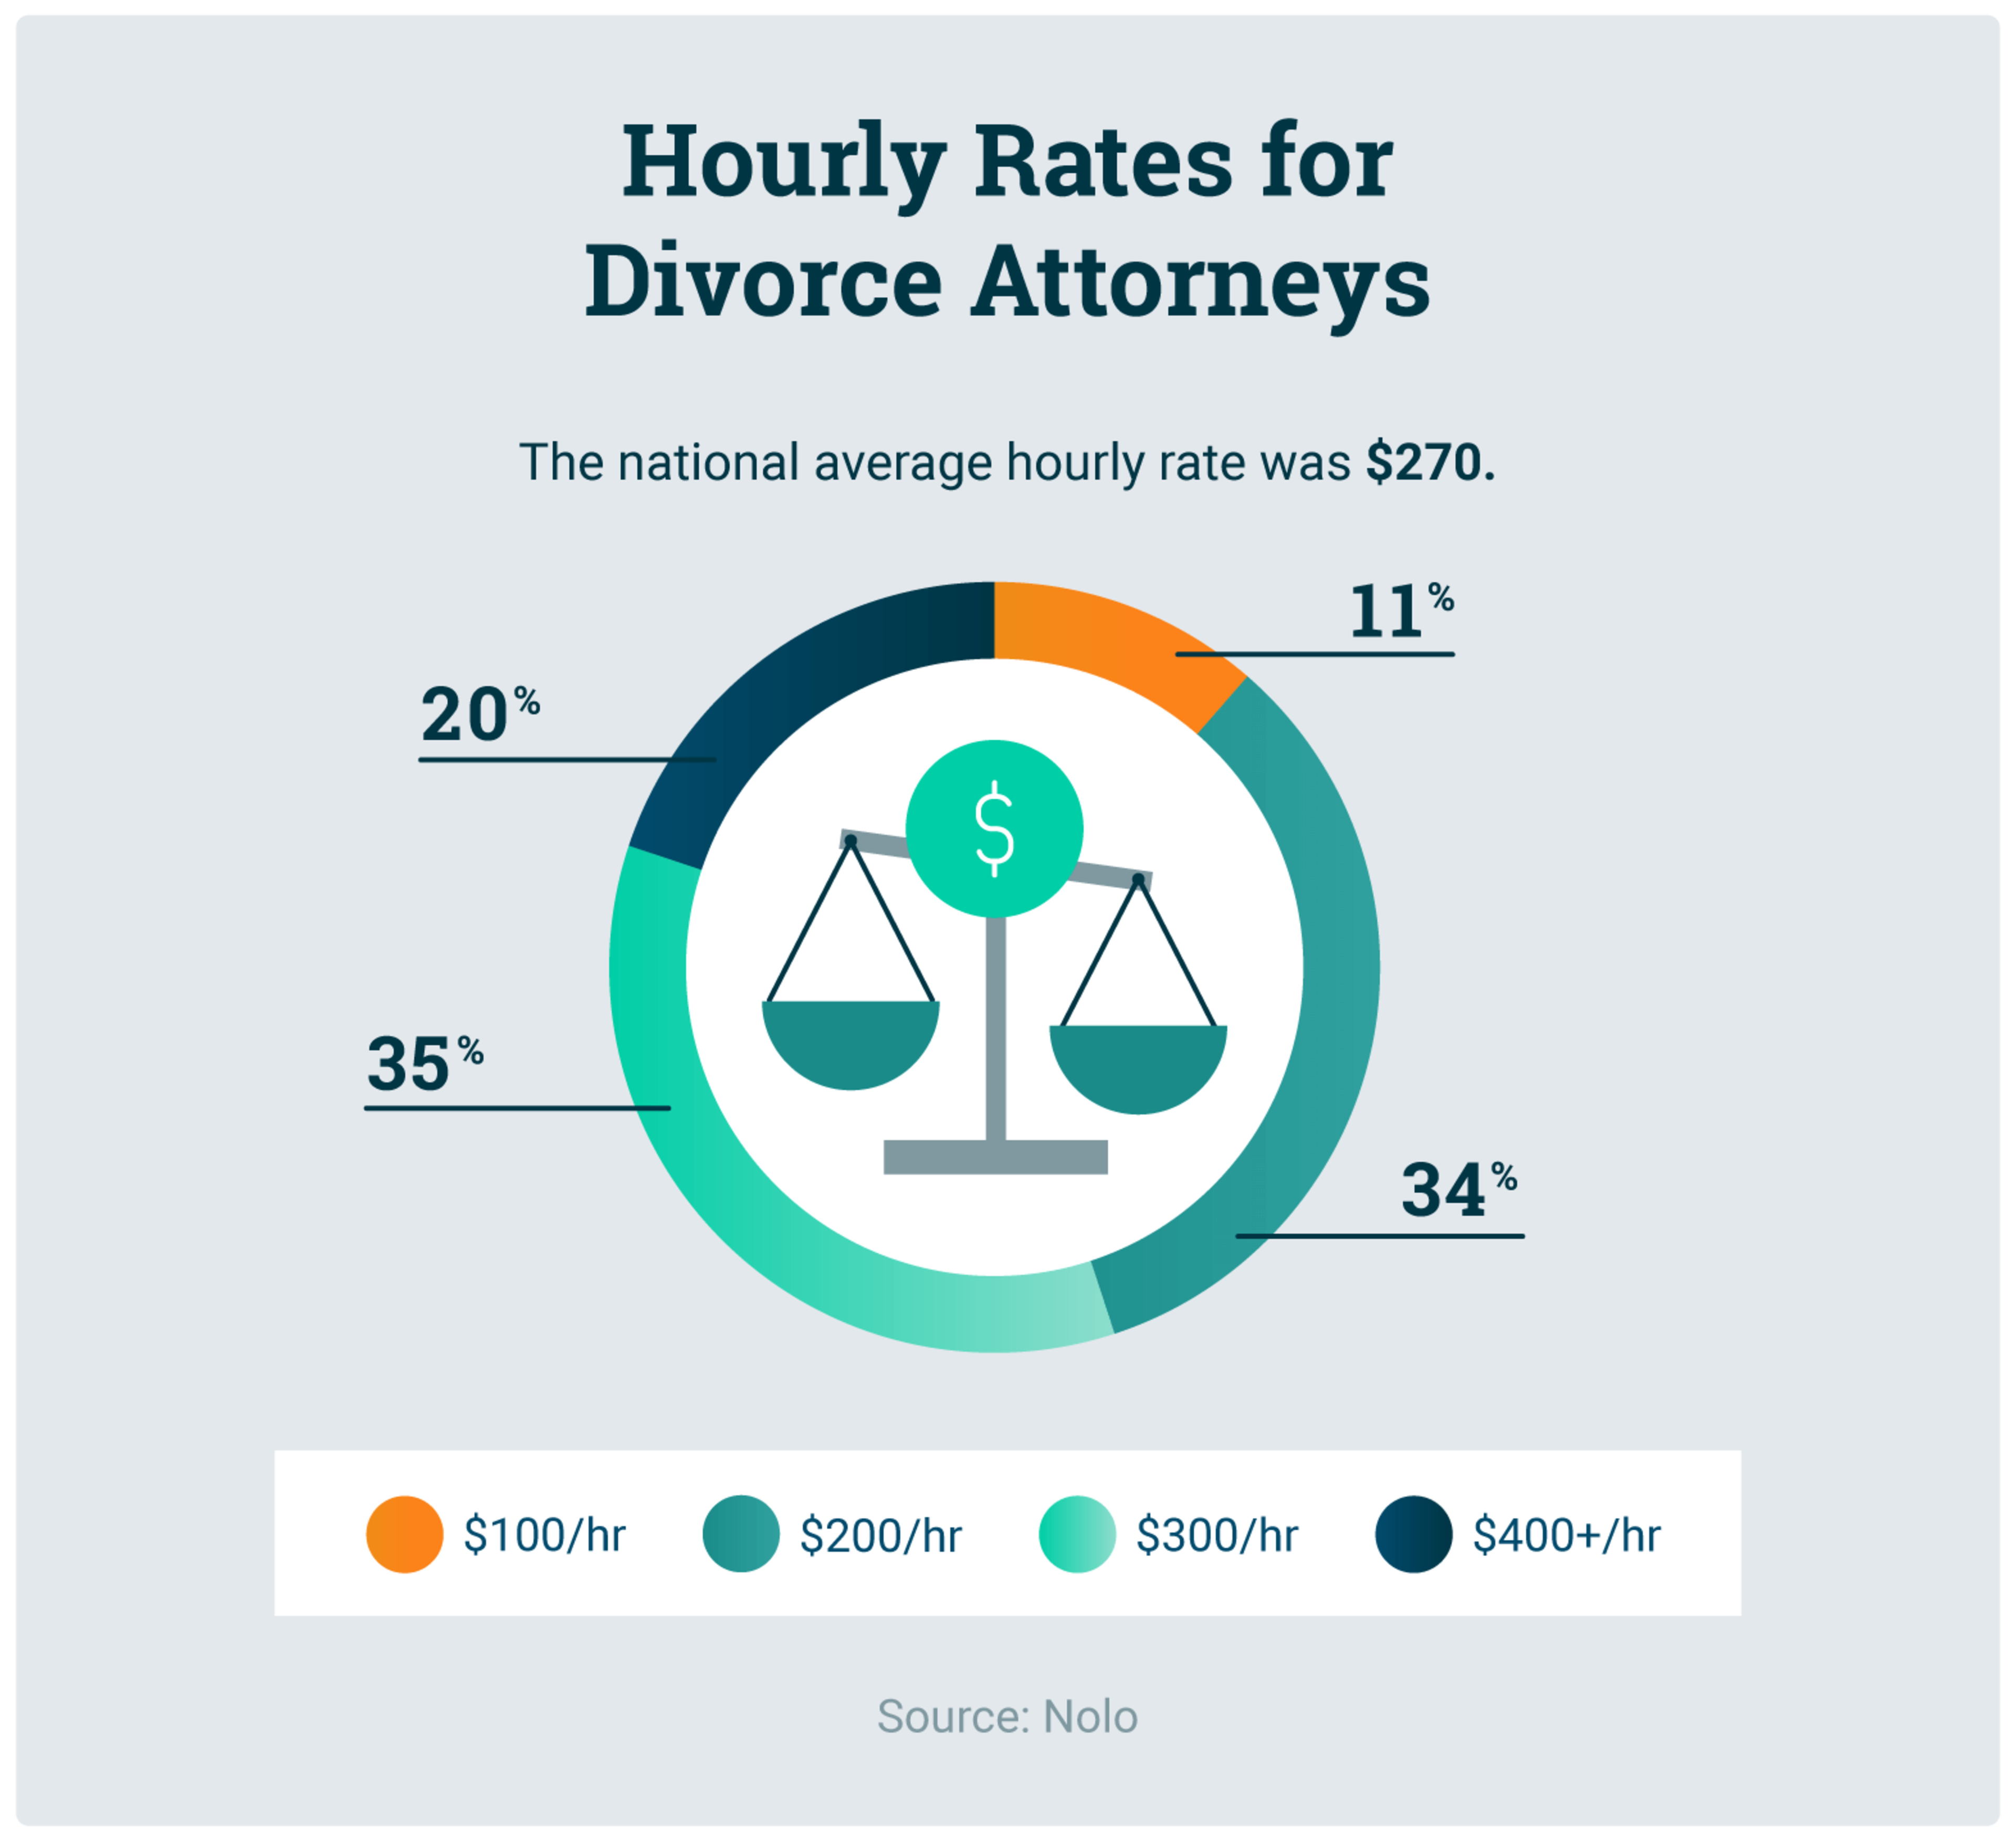 Hourly Rates for Divorce Attorneys